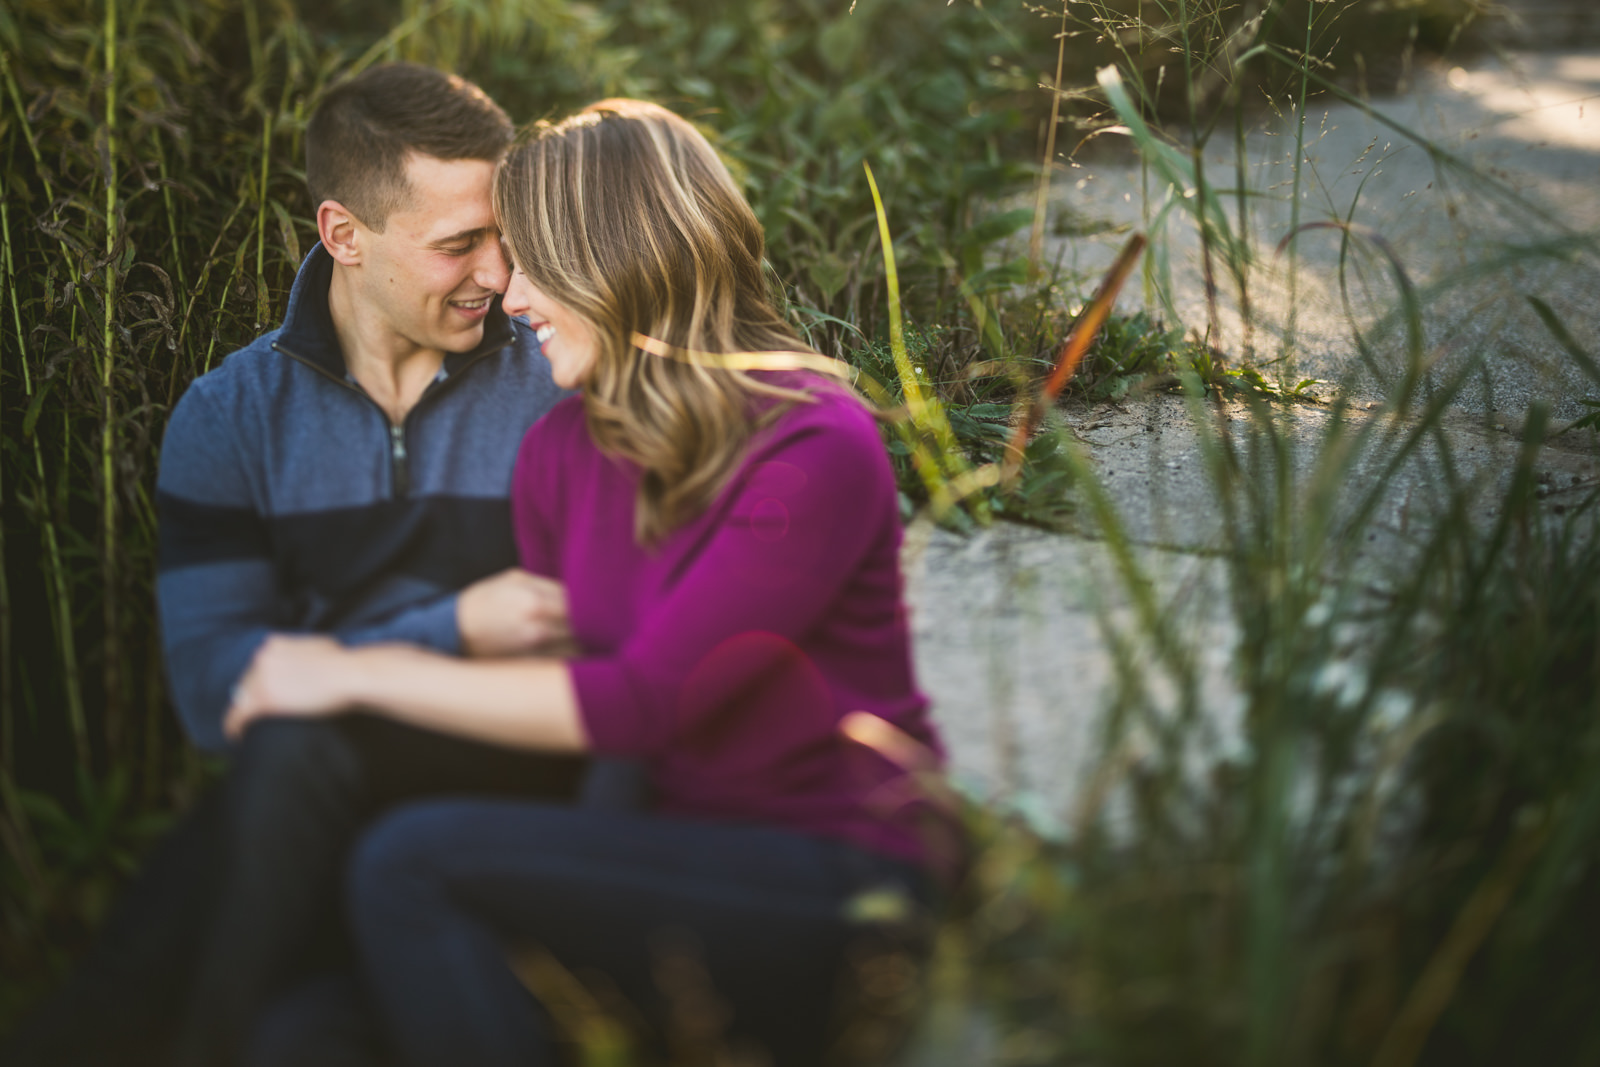 12 best engagement photographer in chicago - Kelly + Dave // Chicago Engagement Session